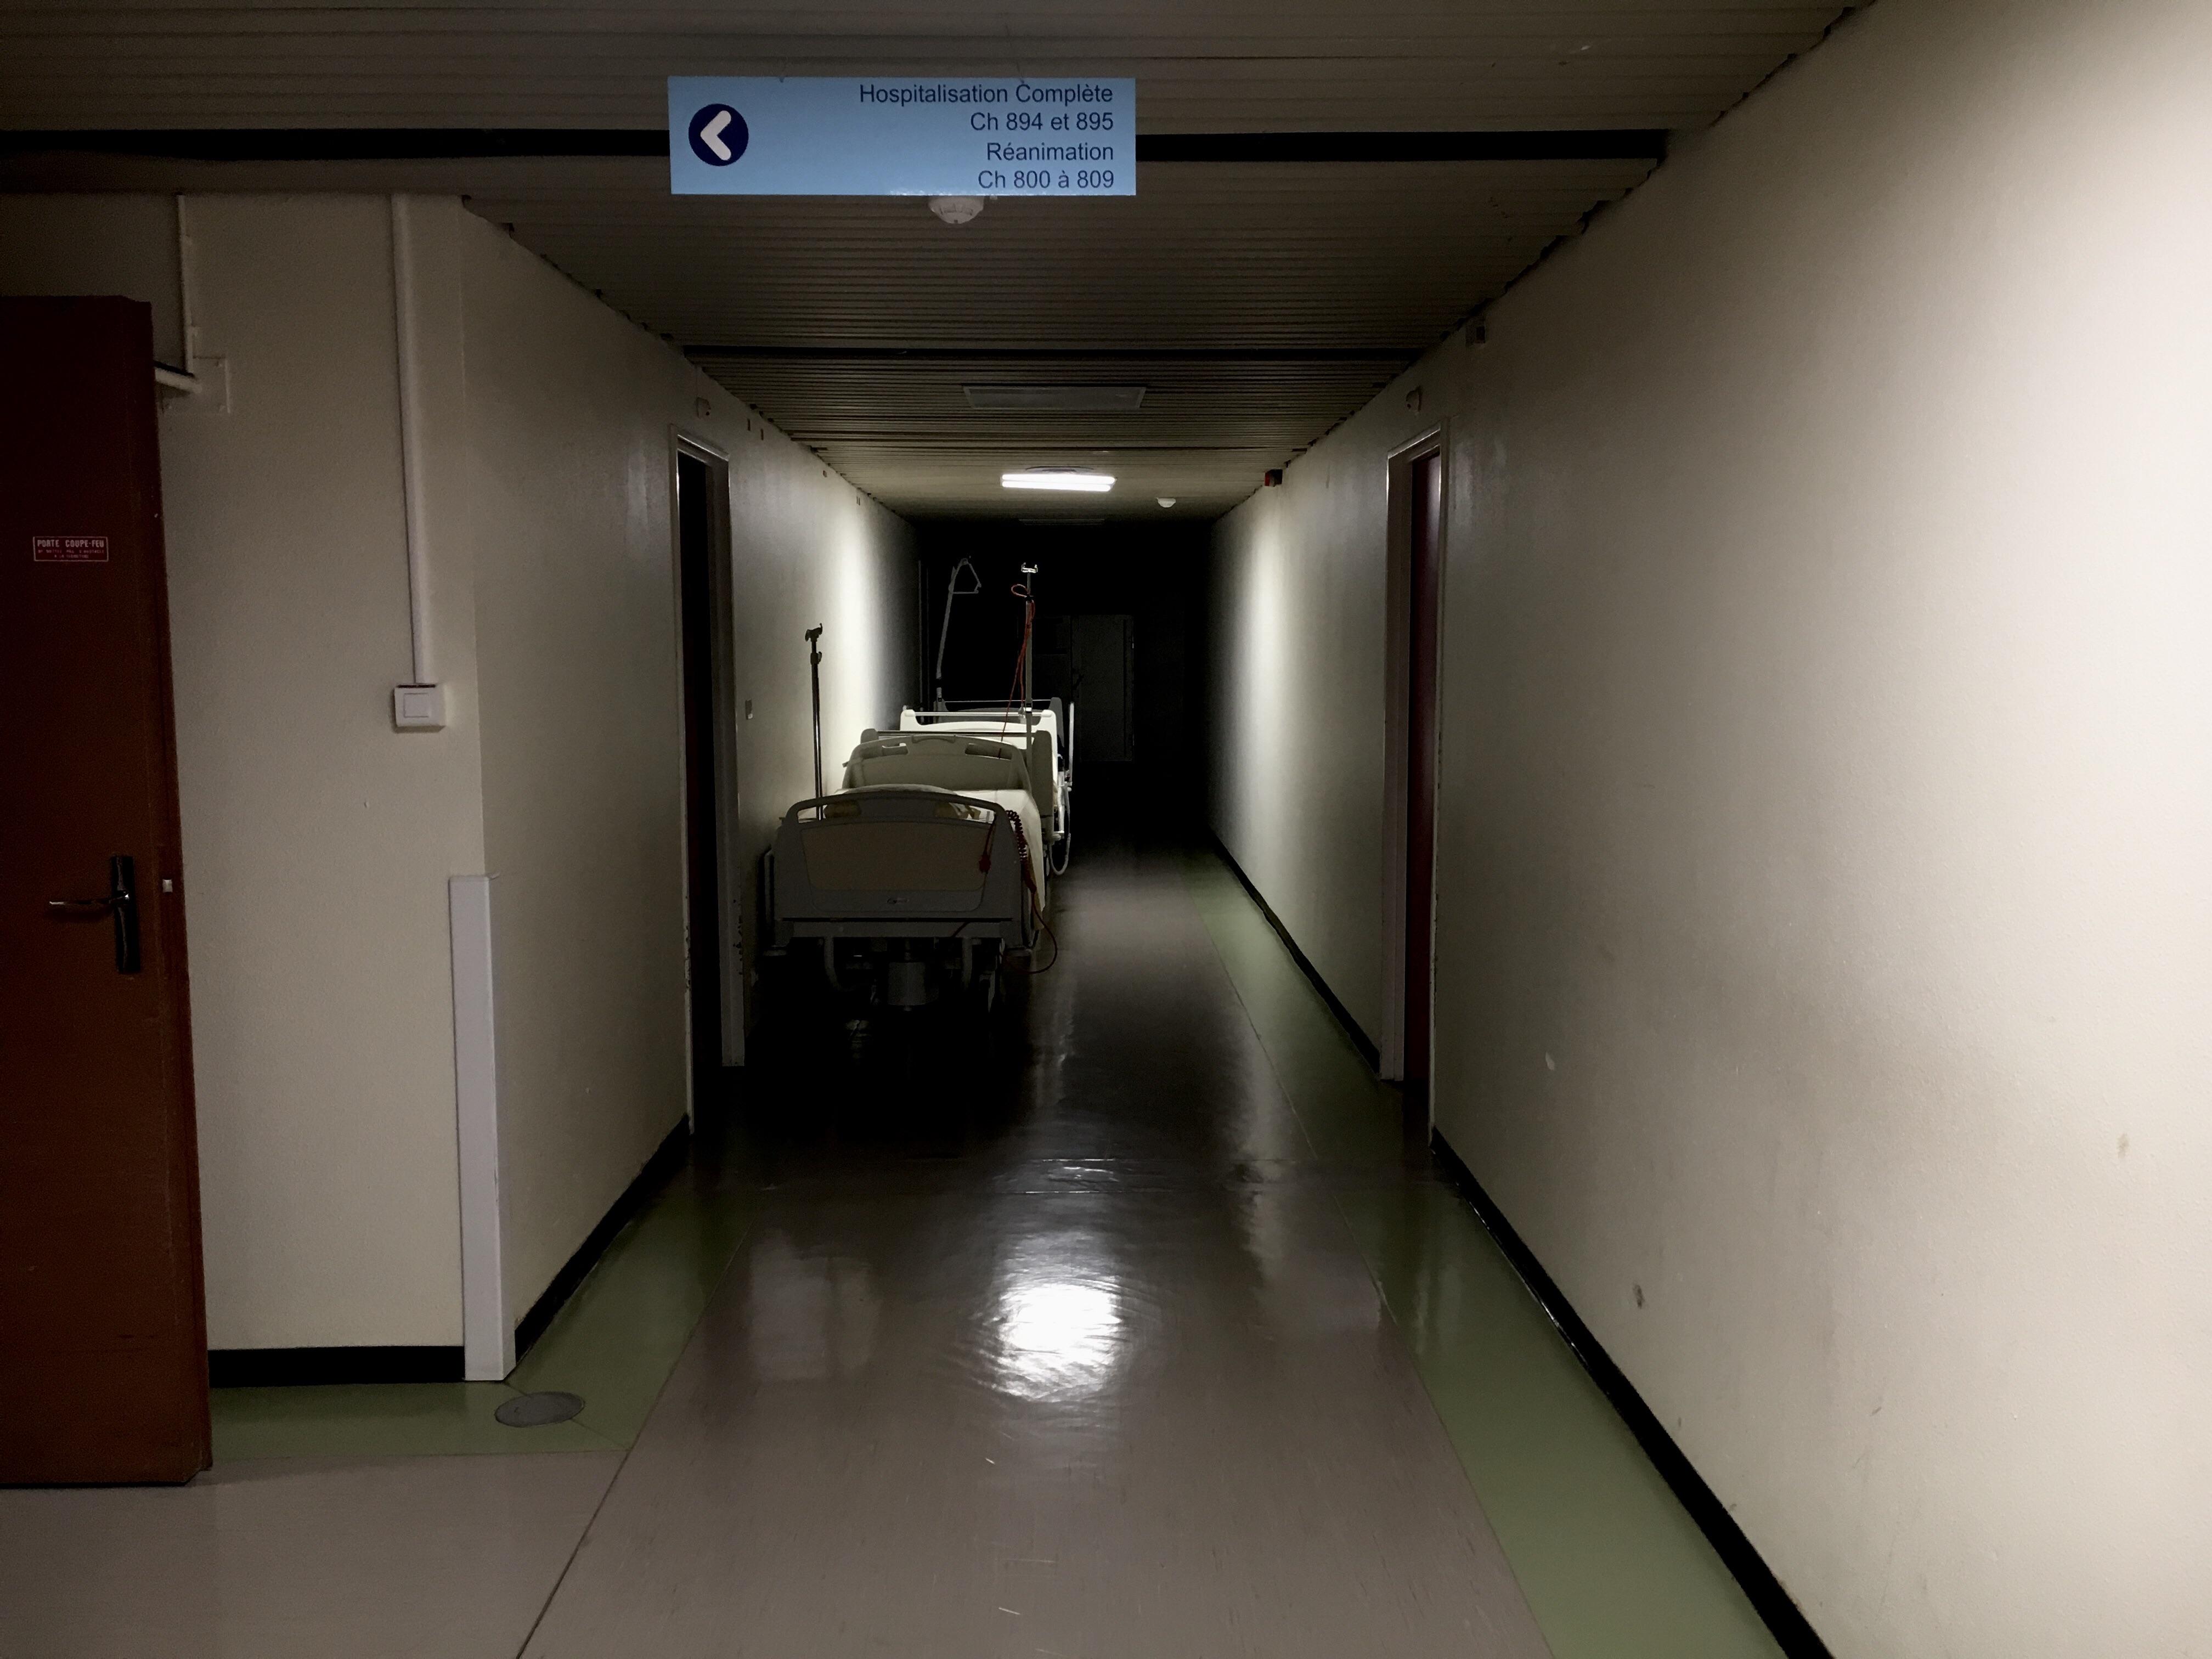 Took this photo in a hospital. A corridor with a dark end looks like ...